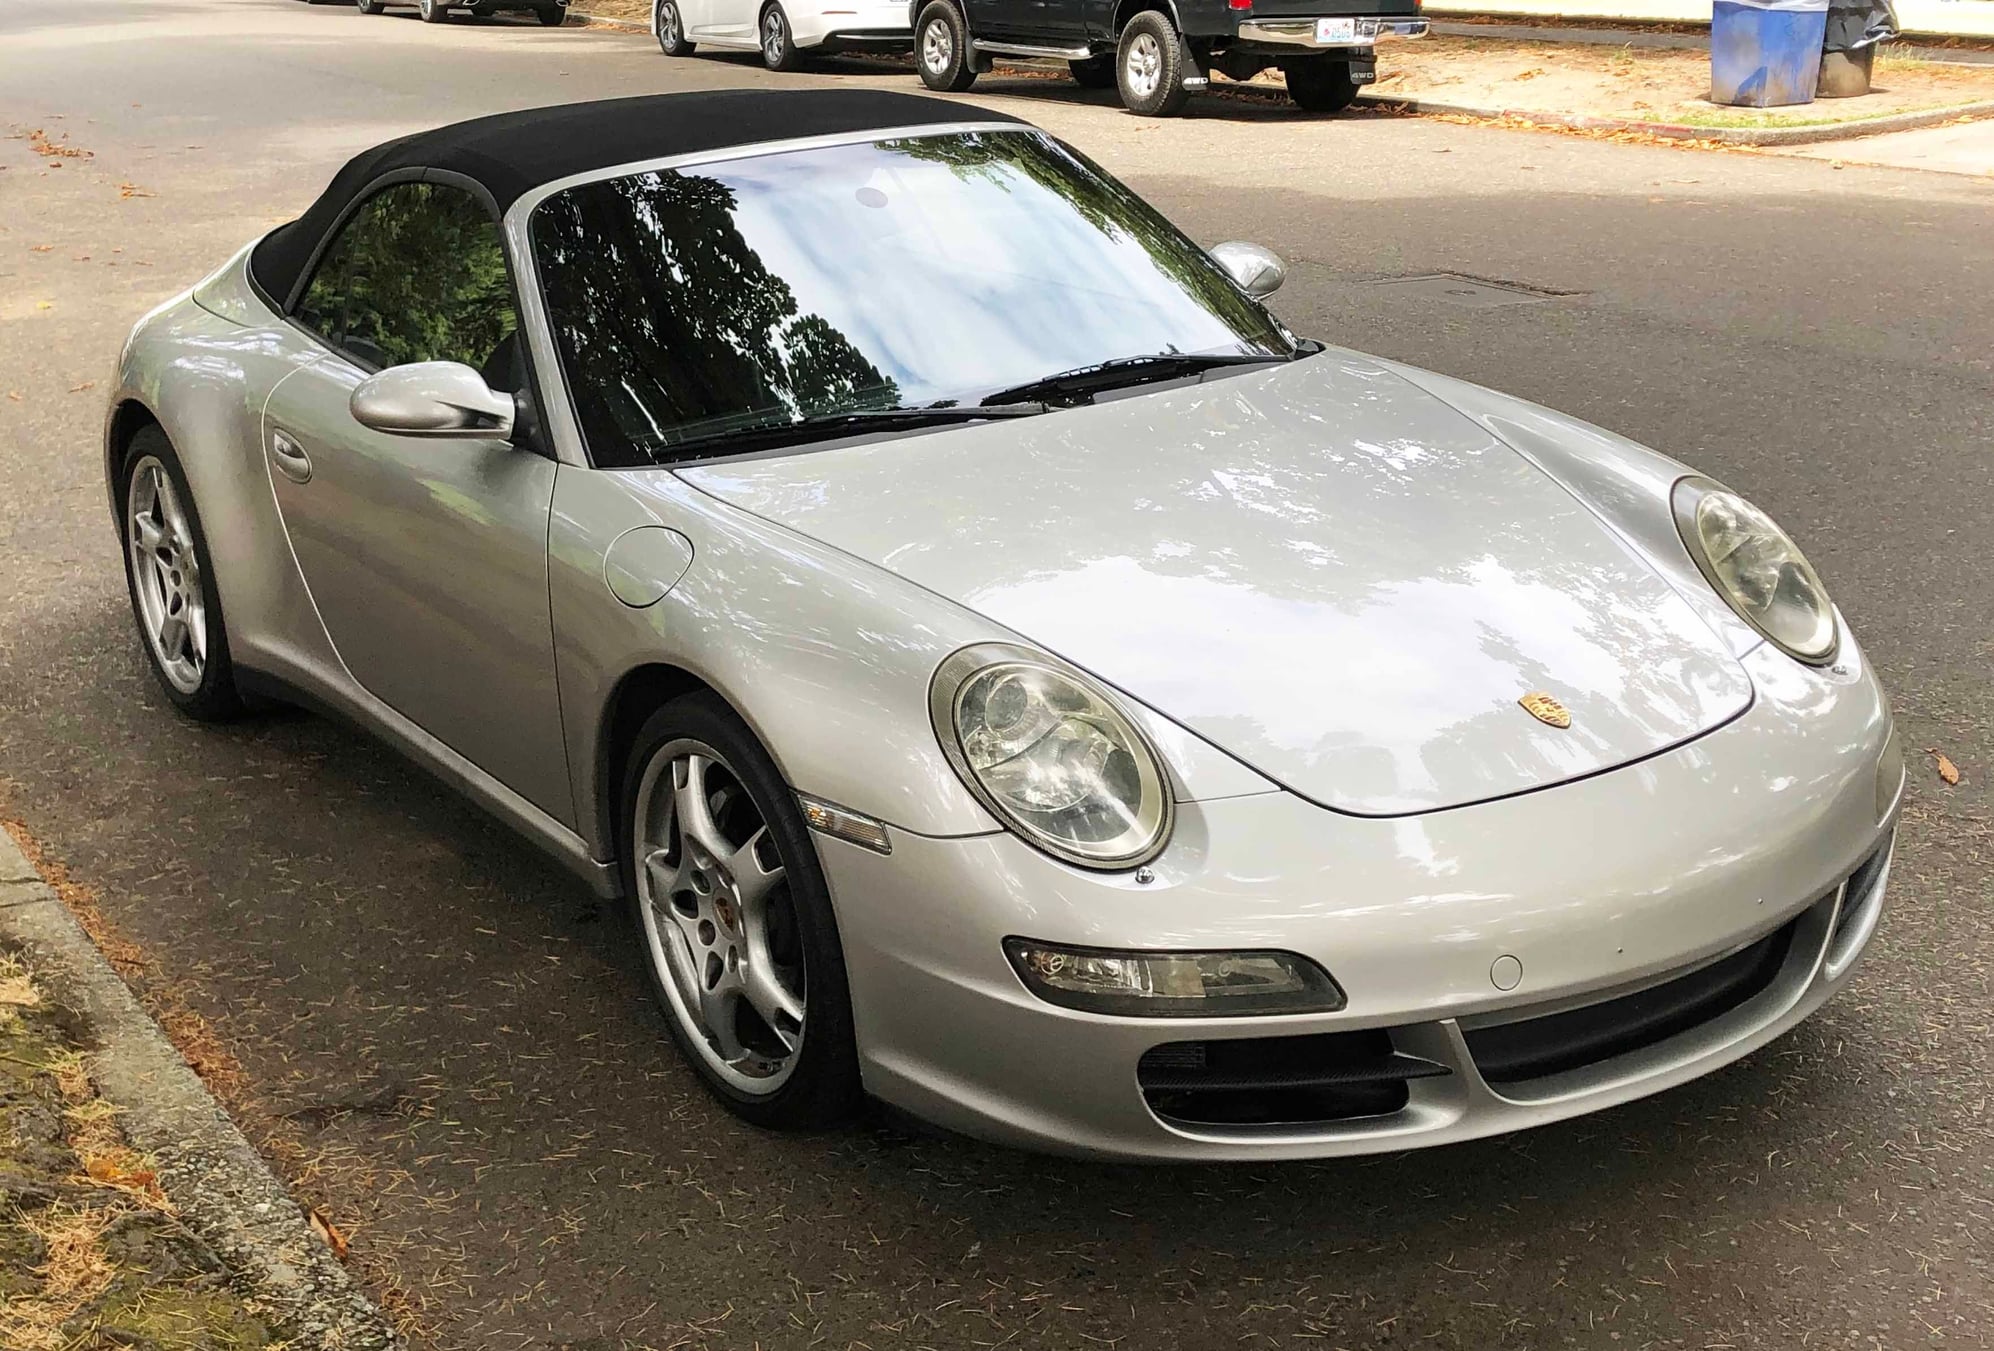 2006 Porsche 911 - 2006 997 C4 Cabriolet - Silver/Black Full Leather - Manual Trans! New Clutch/Flywheel - Used - VIN WP0CA29916S755744 - 87,600 Miles - 6 cyl - AWD - Manual - Convertible - Silver - Seattle, WA 98122, United States